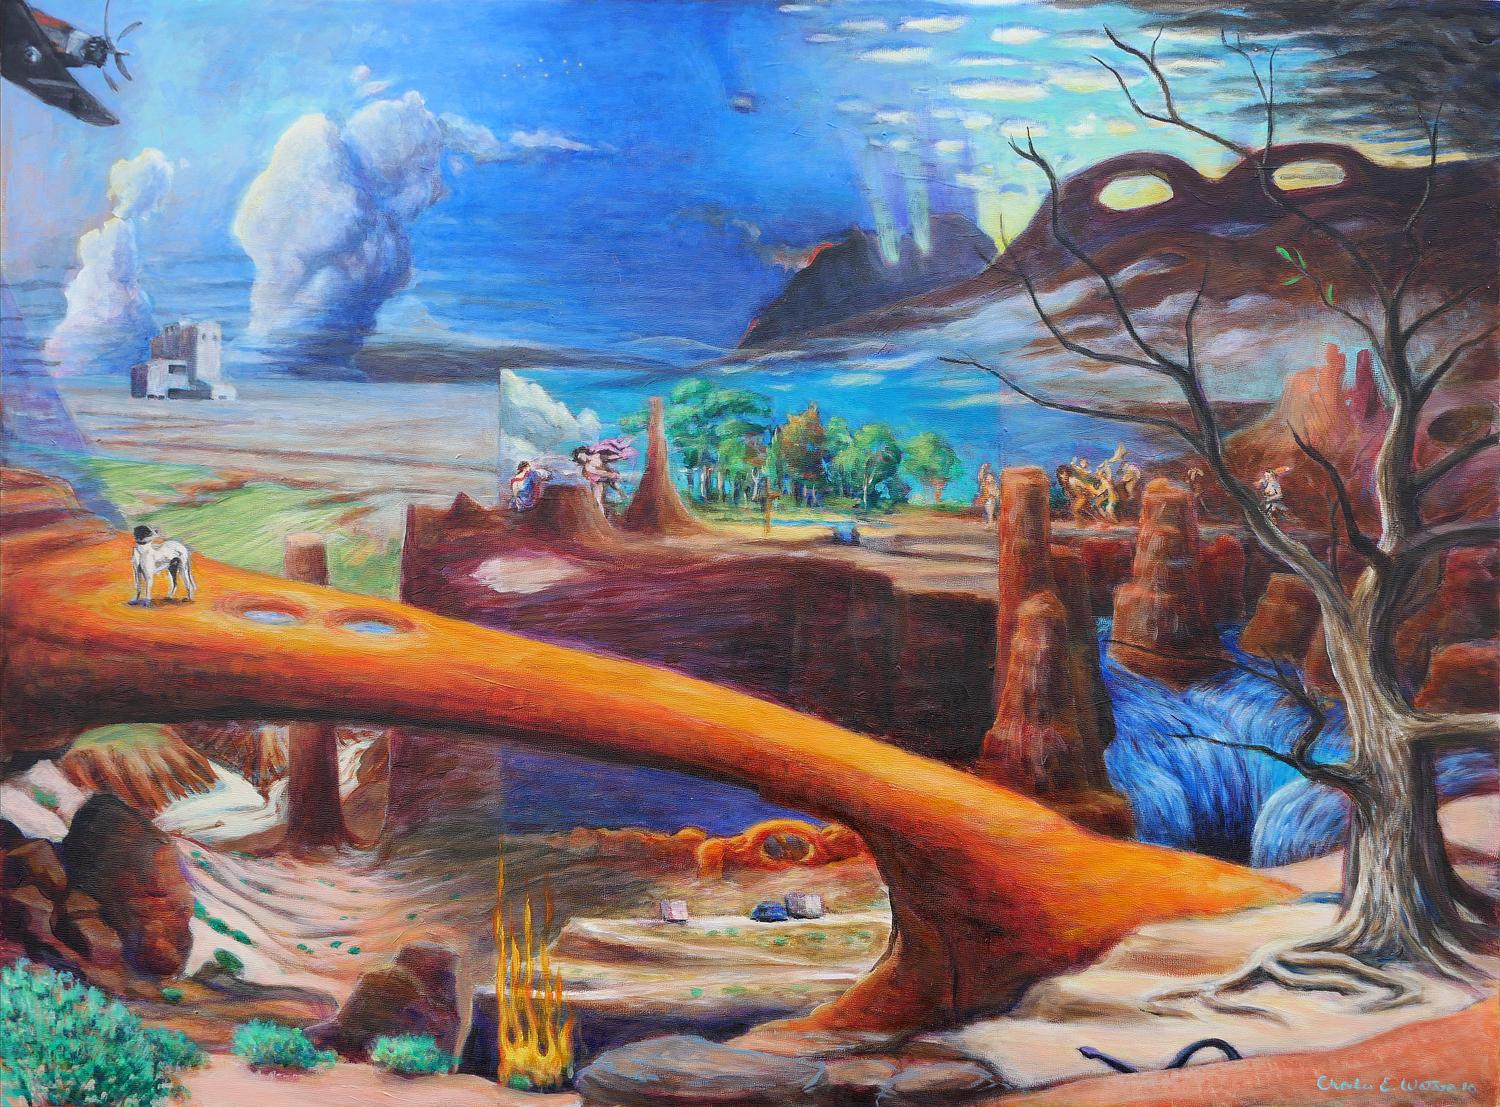 Charles E. Watson Abstract Painting - “Gap” Contemporary Abstract Surrealist Landscape Painting of Bacchus & Ariadne